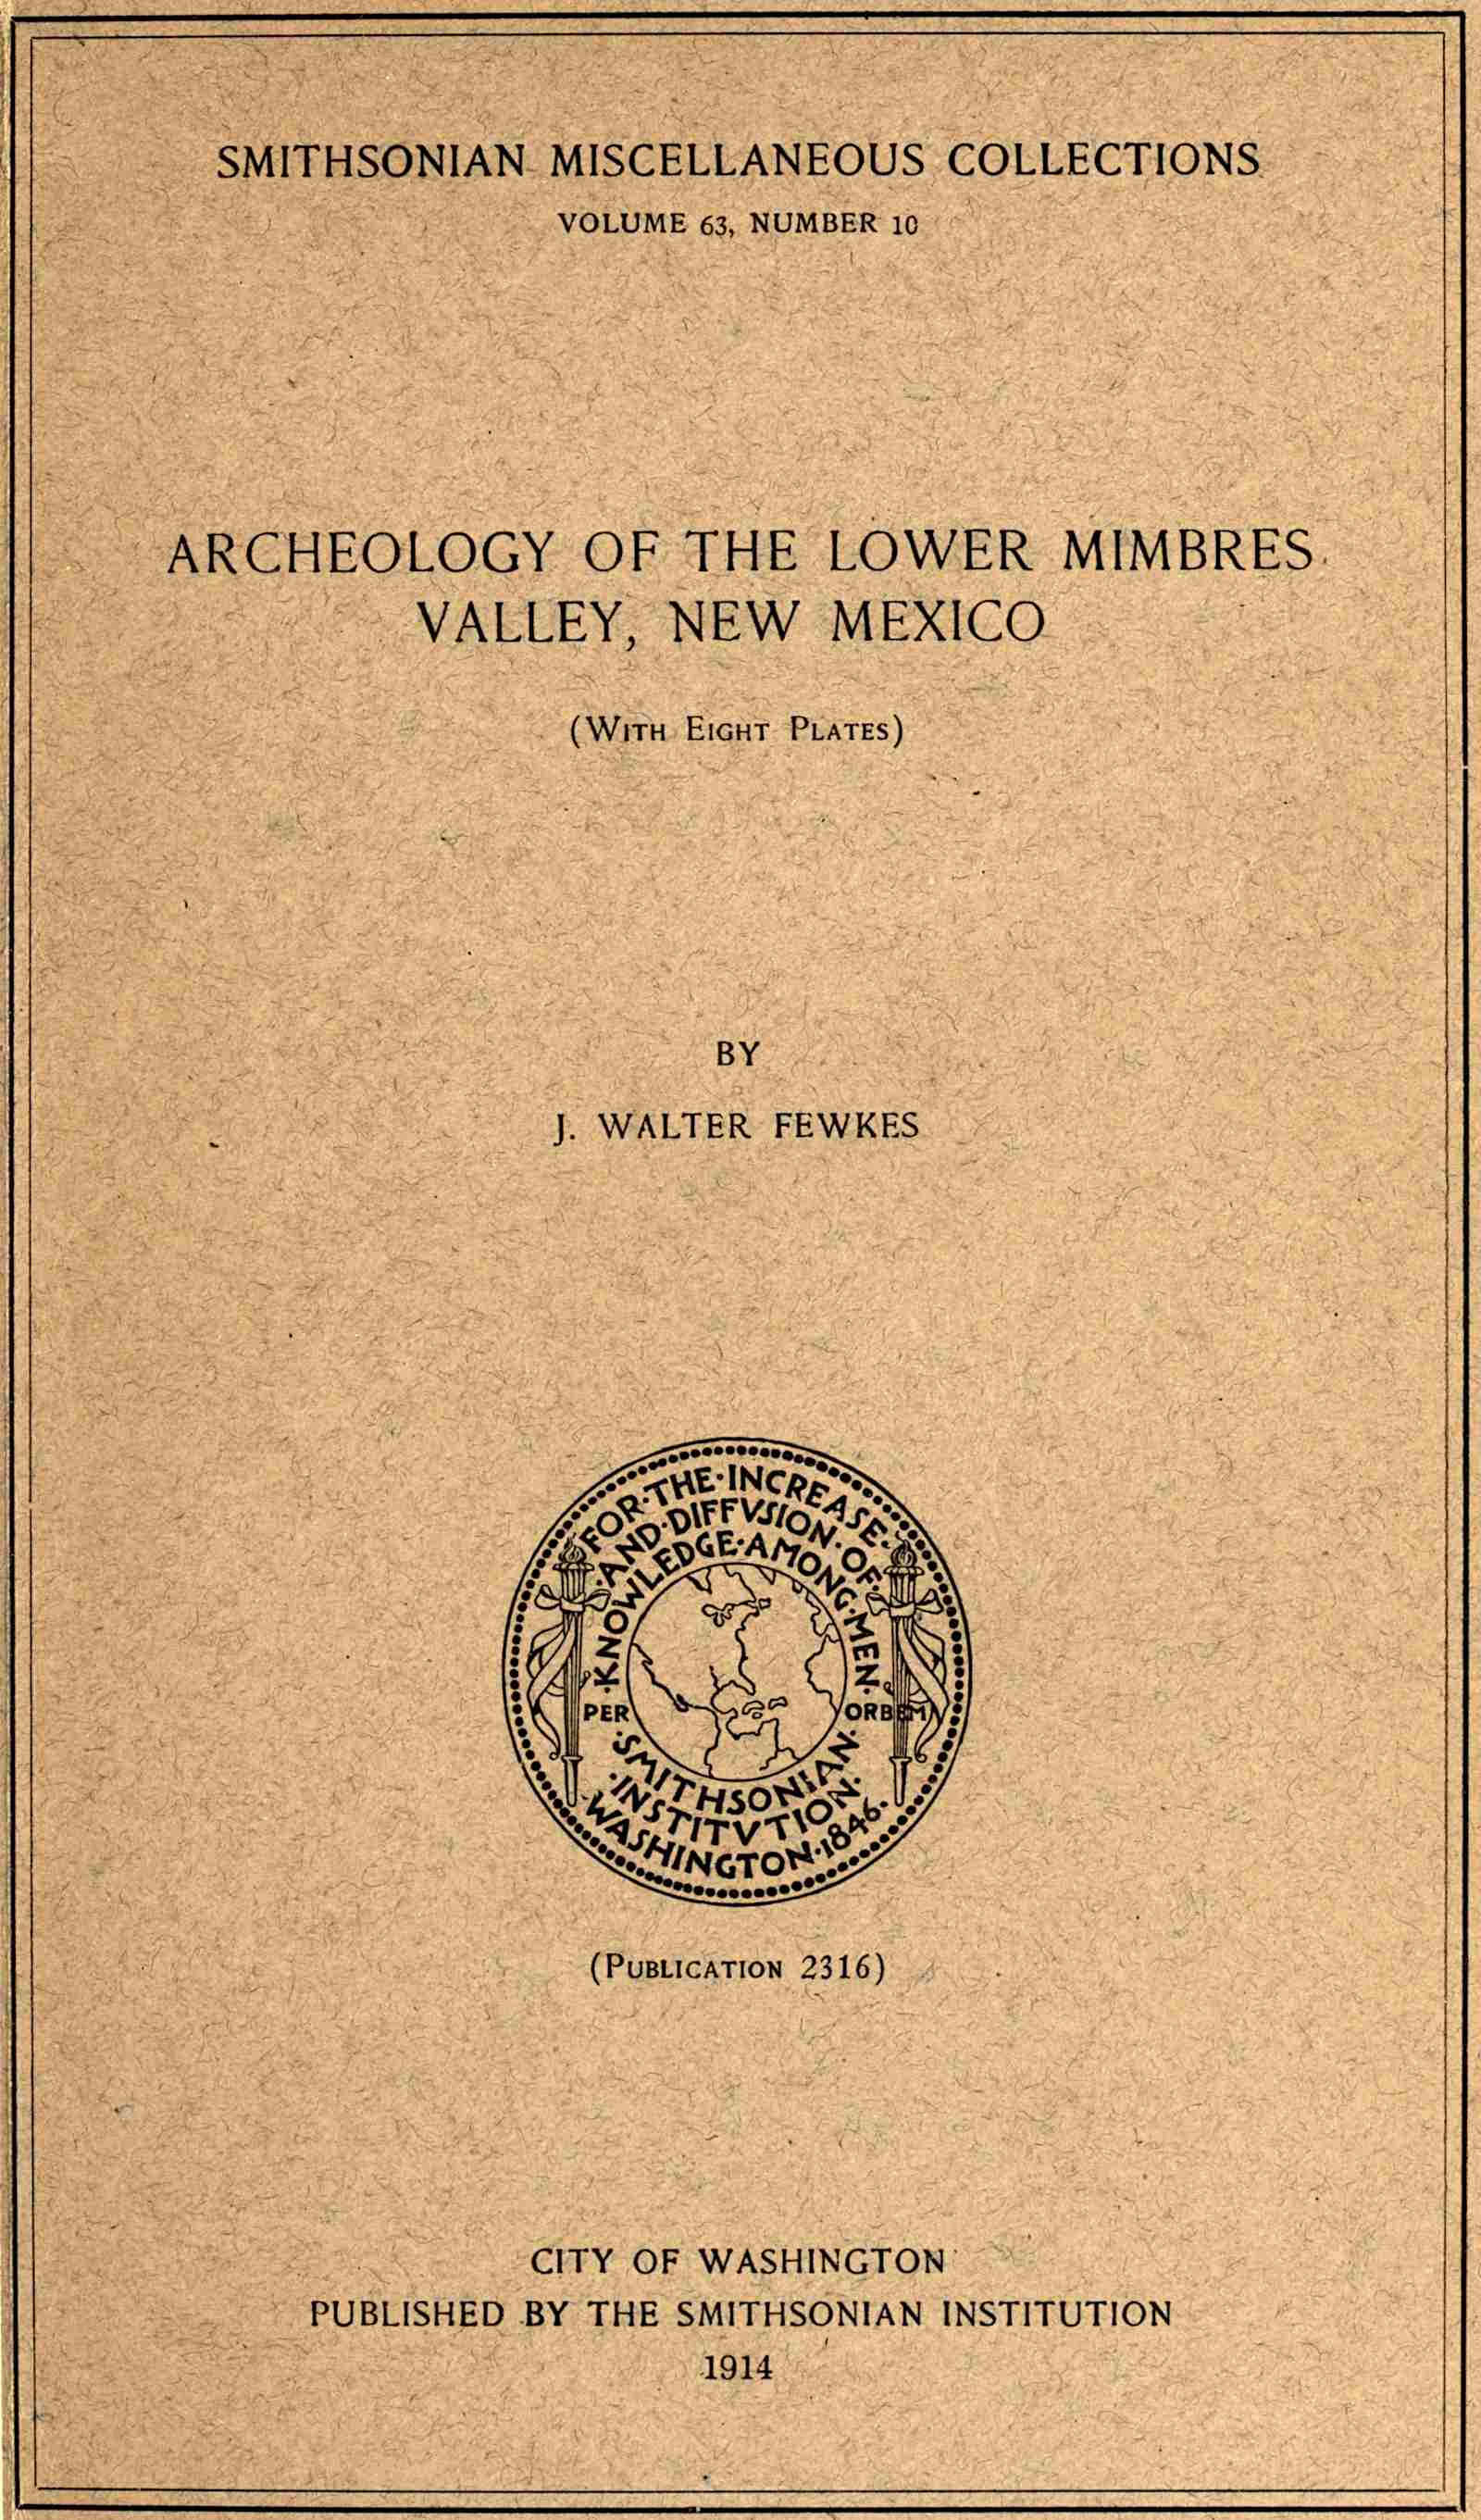 Archeology of the lower Mimbres valley, New Mexico